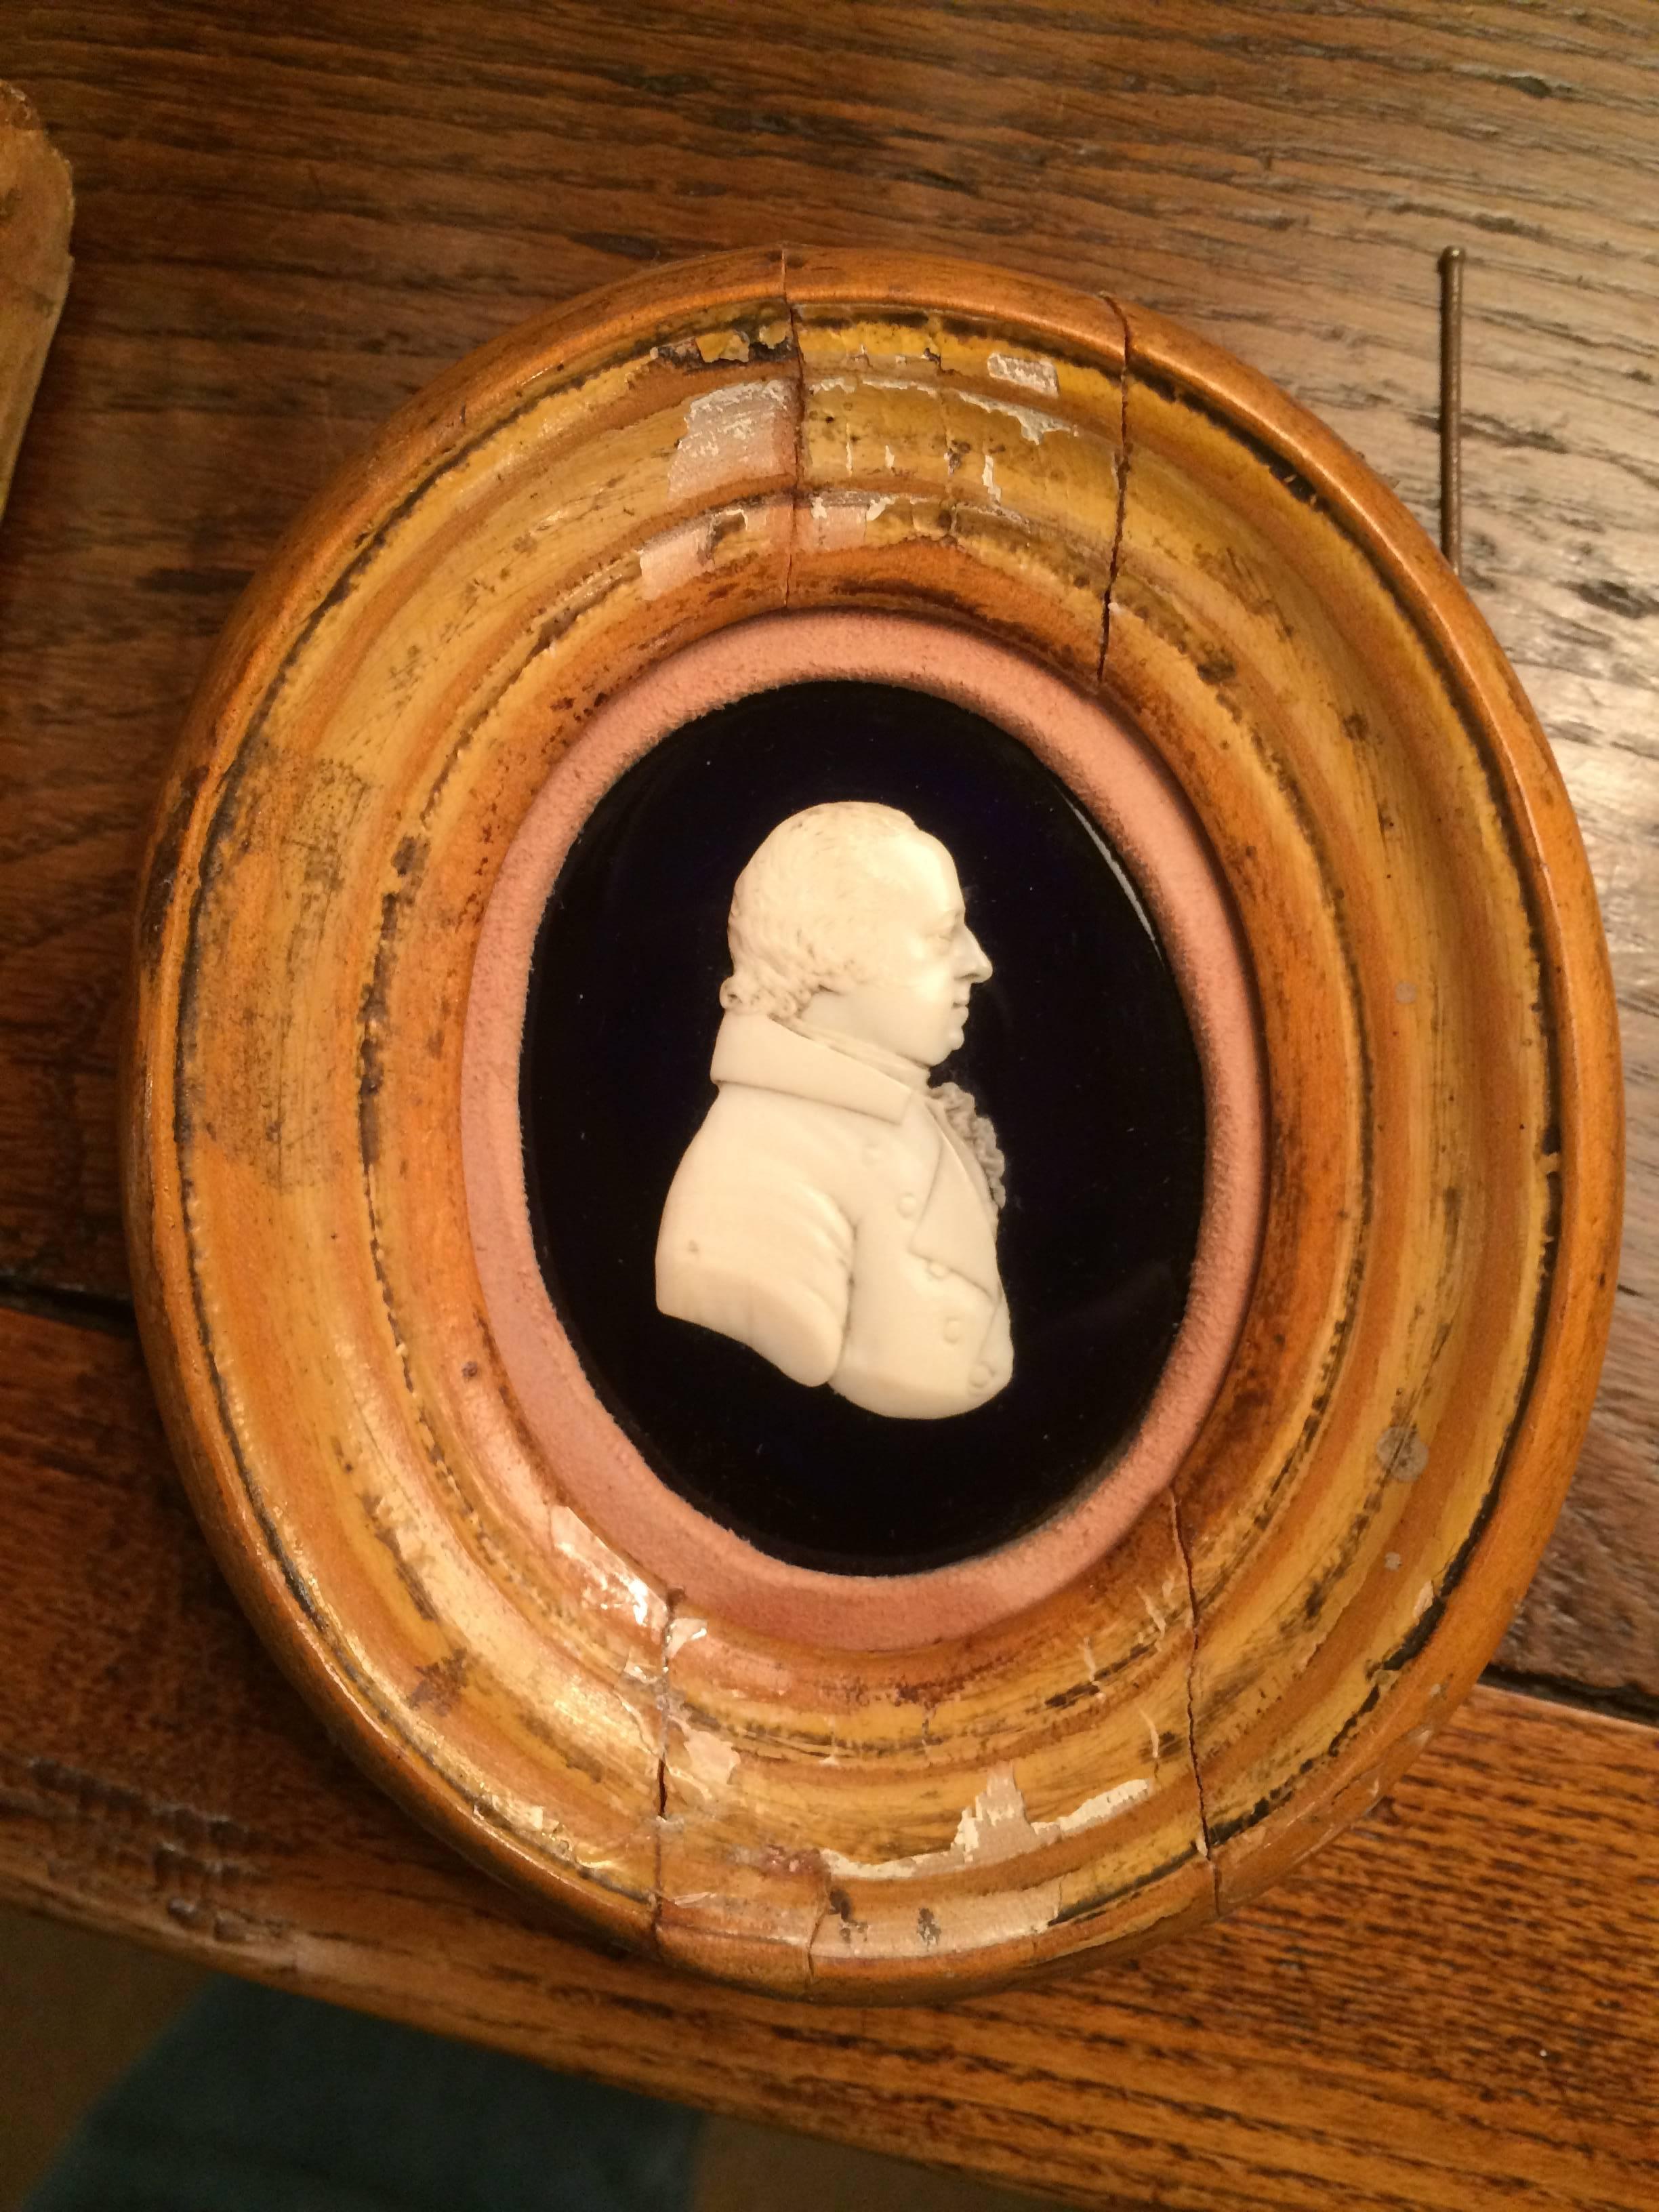 Very fine English early 19th century carved bone portrait of a nobleman or sea captain laid down on black glass and set in an oval walnut frame with an unusual suede mat. The gentleman shown in right profile wearing a collared coat with a ruffled